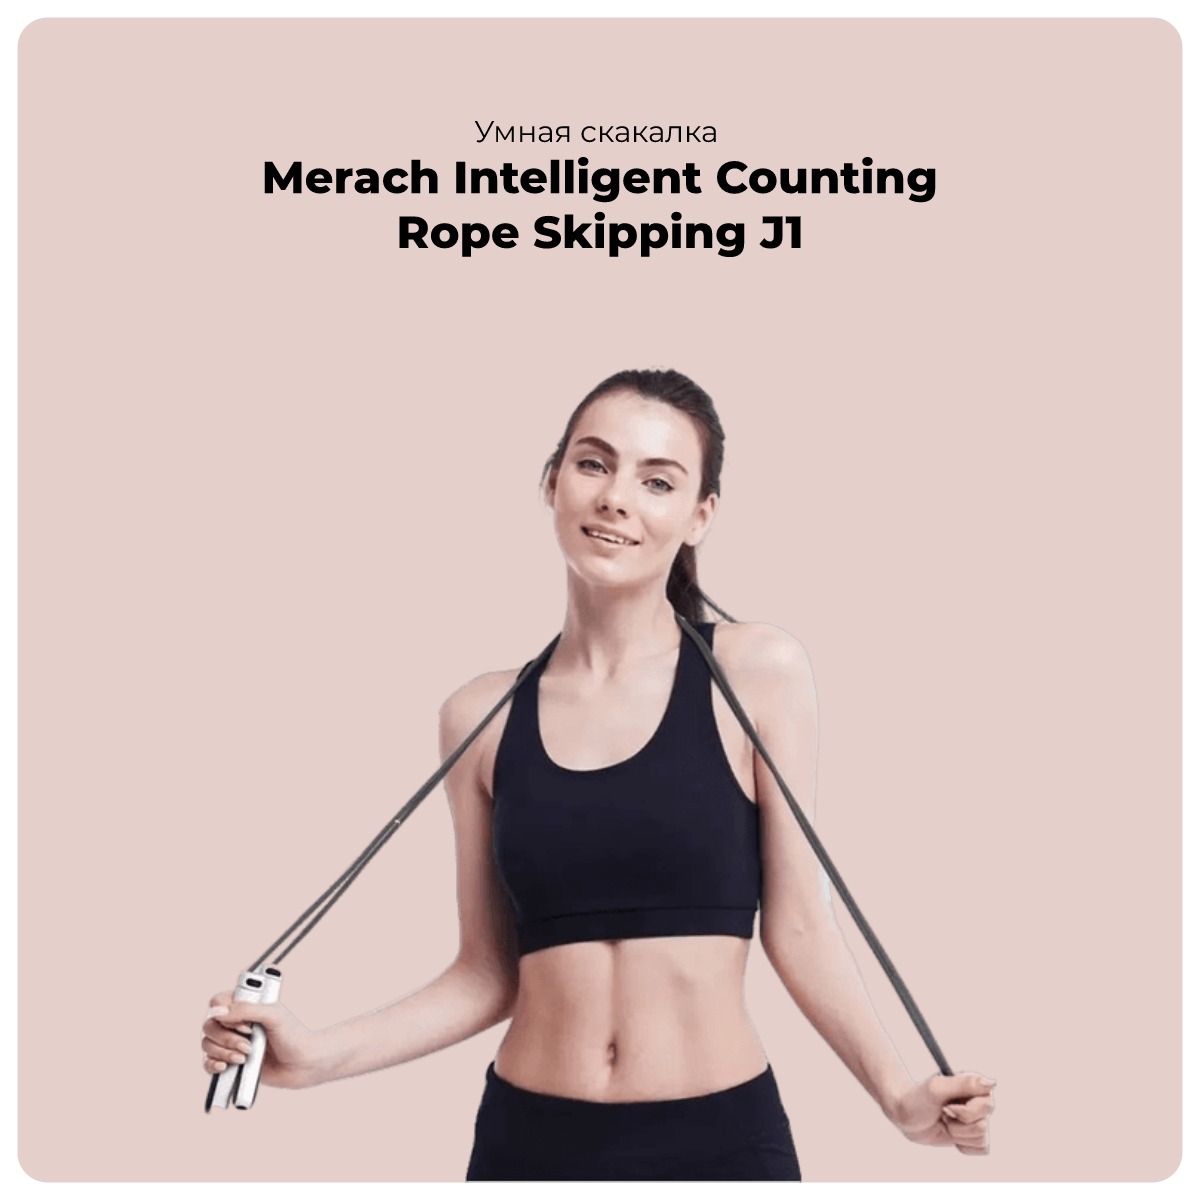 Merach-Intelligent-Counting-Rope-Skipping-J1-01